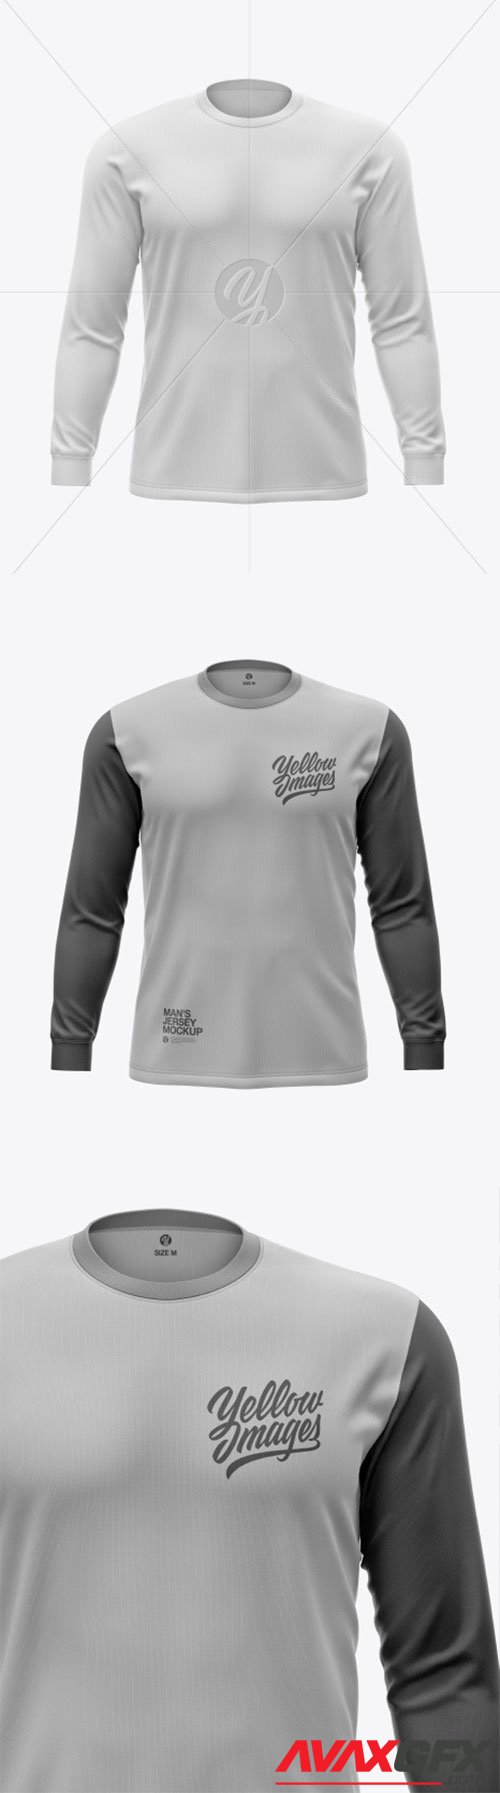 Men's Jersey With Long Sleeve Mockup 61439